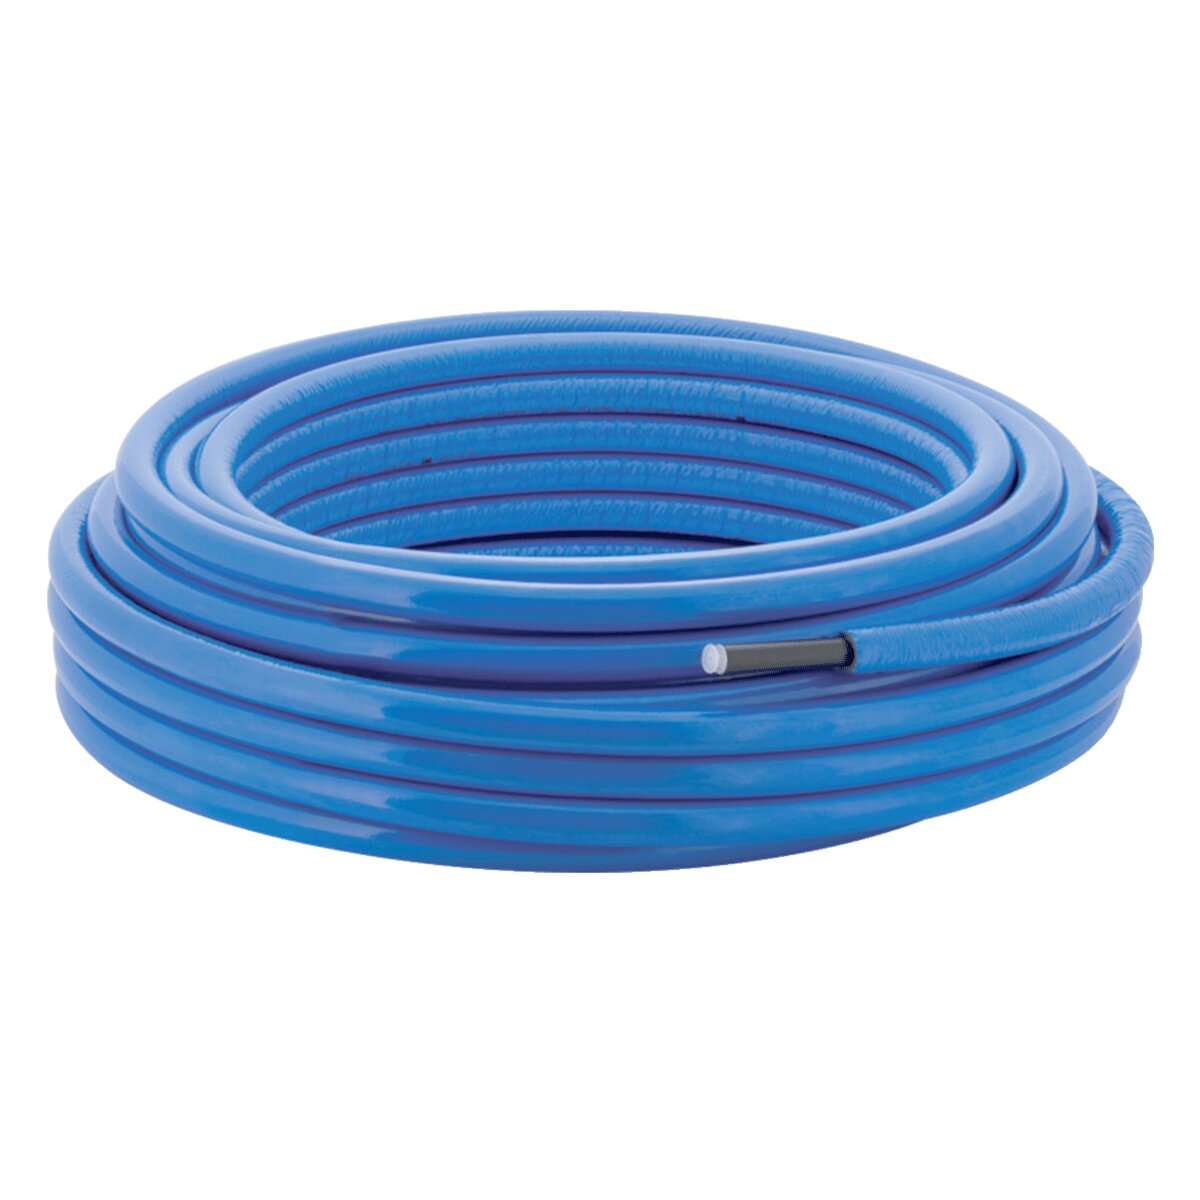 Geberit Mepla multilayer pipe Ø26x6 mm with 6 mm insulating sheath - For domestic water